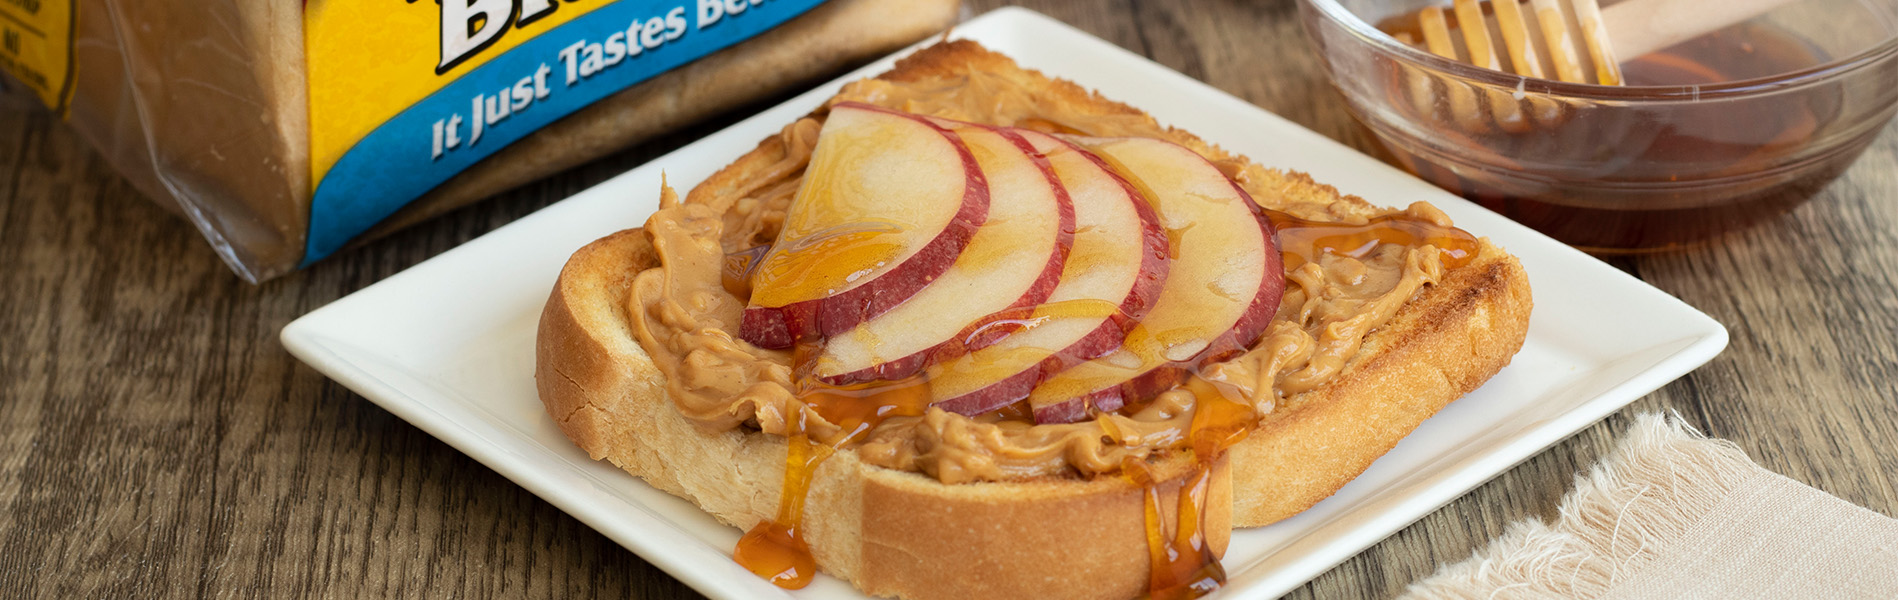 Toast with peanut butter, apples and honey on Sara Lee Butter Bread